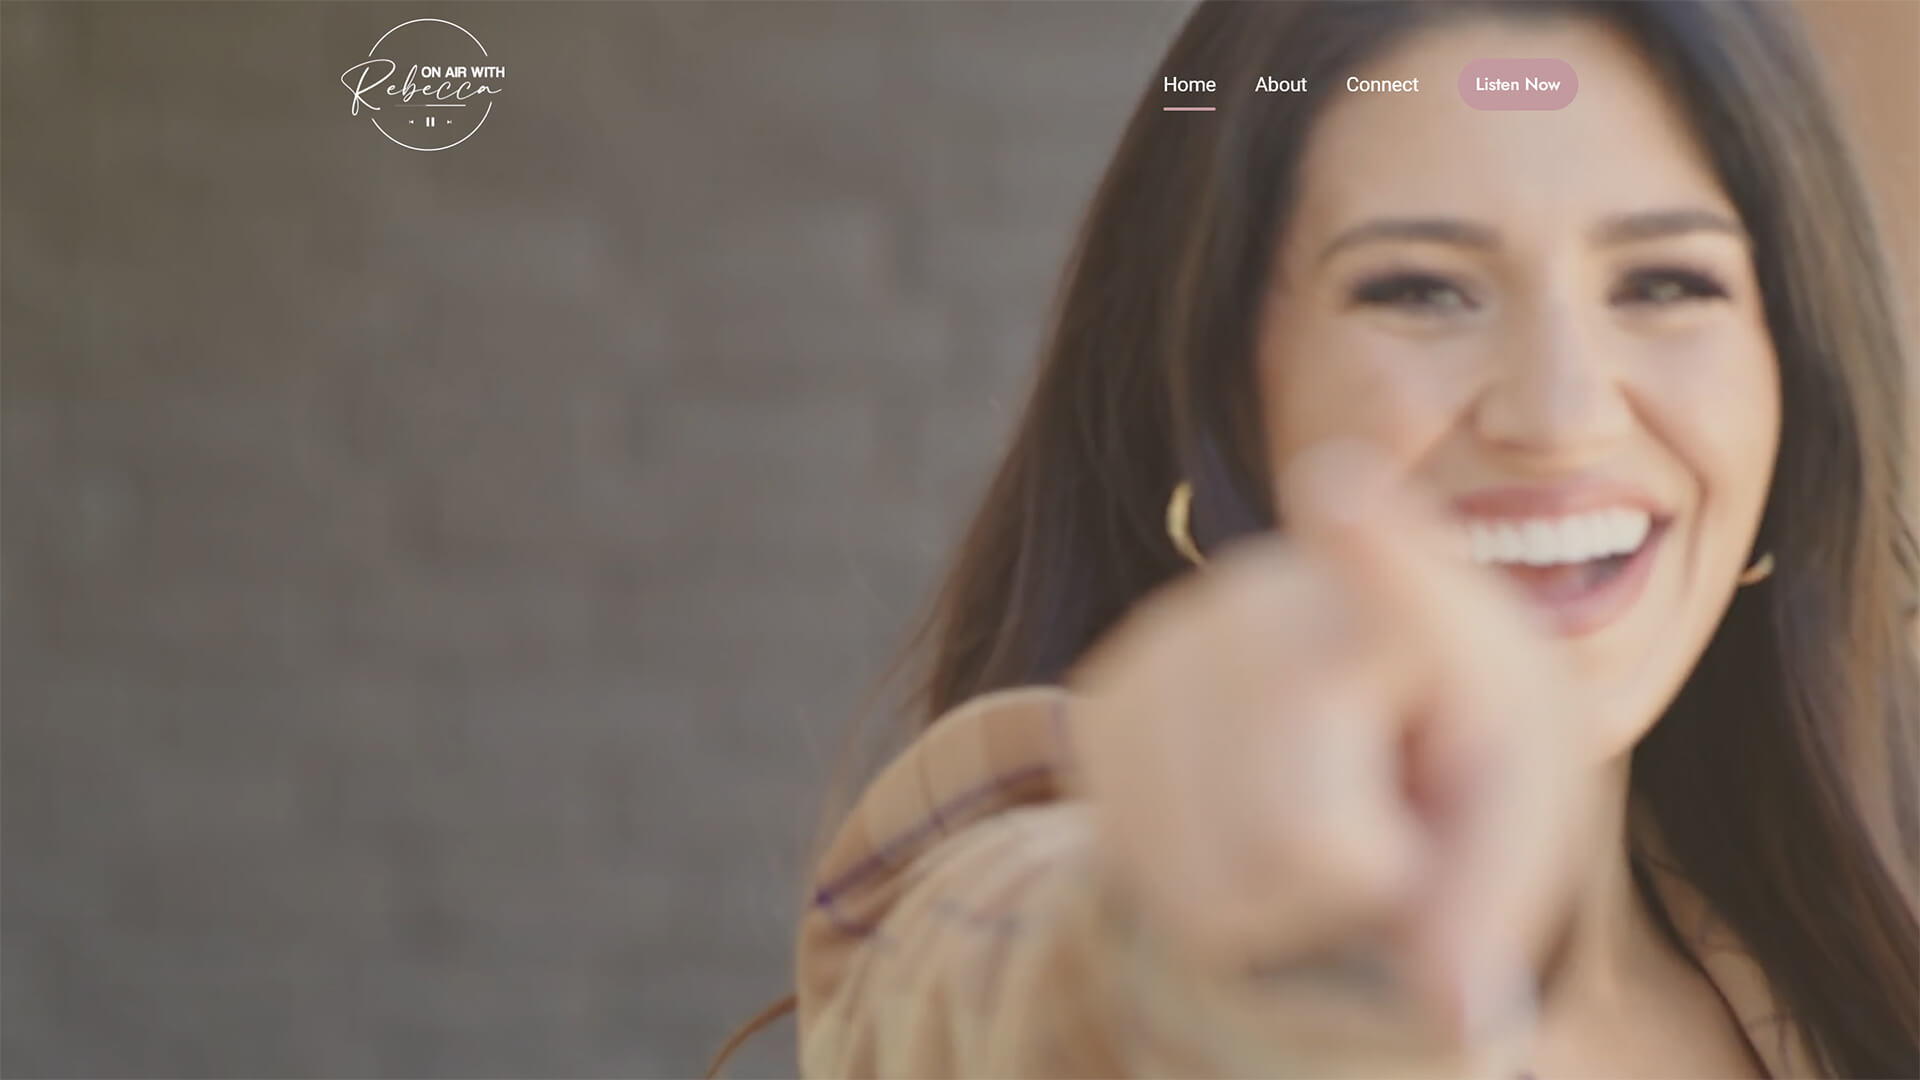 The beautiful rebecca.daystar.com website created with Act3 on the HubSpot CMS